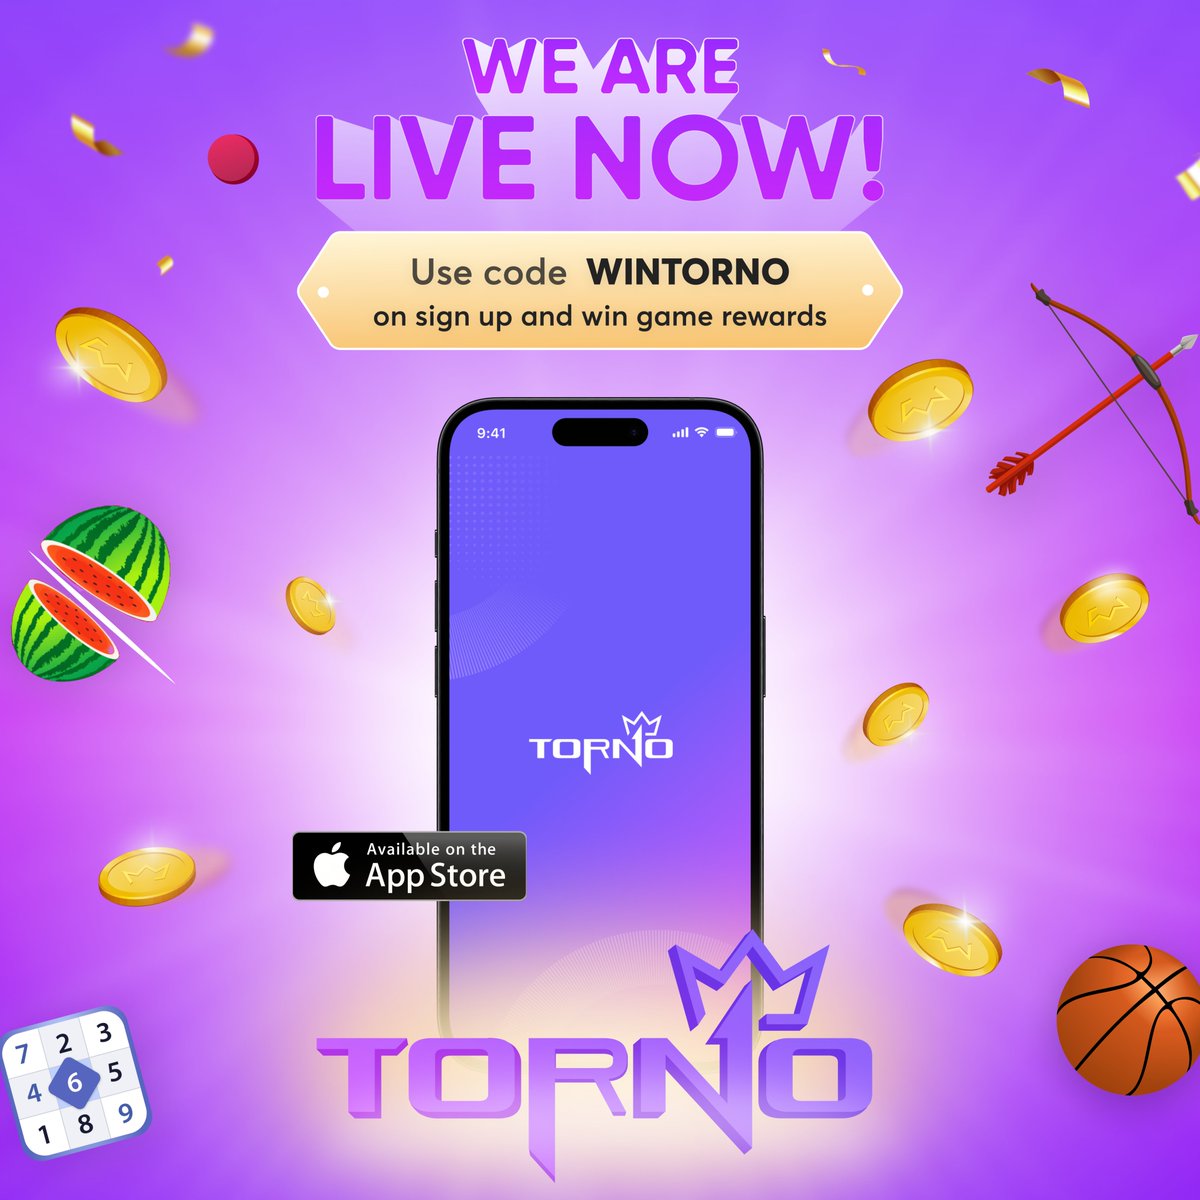 Exciting News Alert! 🚀 TORNO has landed! Available now on the App Store! Dive into the gaming revolution with thrilling tournaments, diverse games, and real cash rewards! No refer code? No problem.

Use code WINTORNO at sign-up and let the games begin! 🎮✨#TORNO #gamelaunch